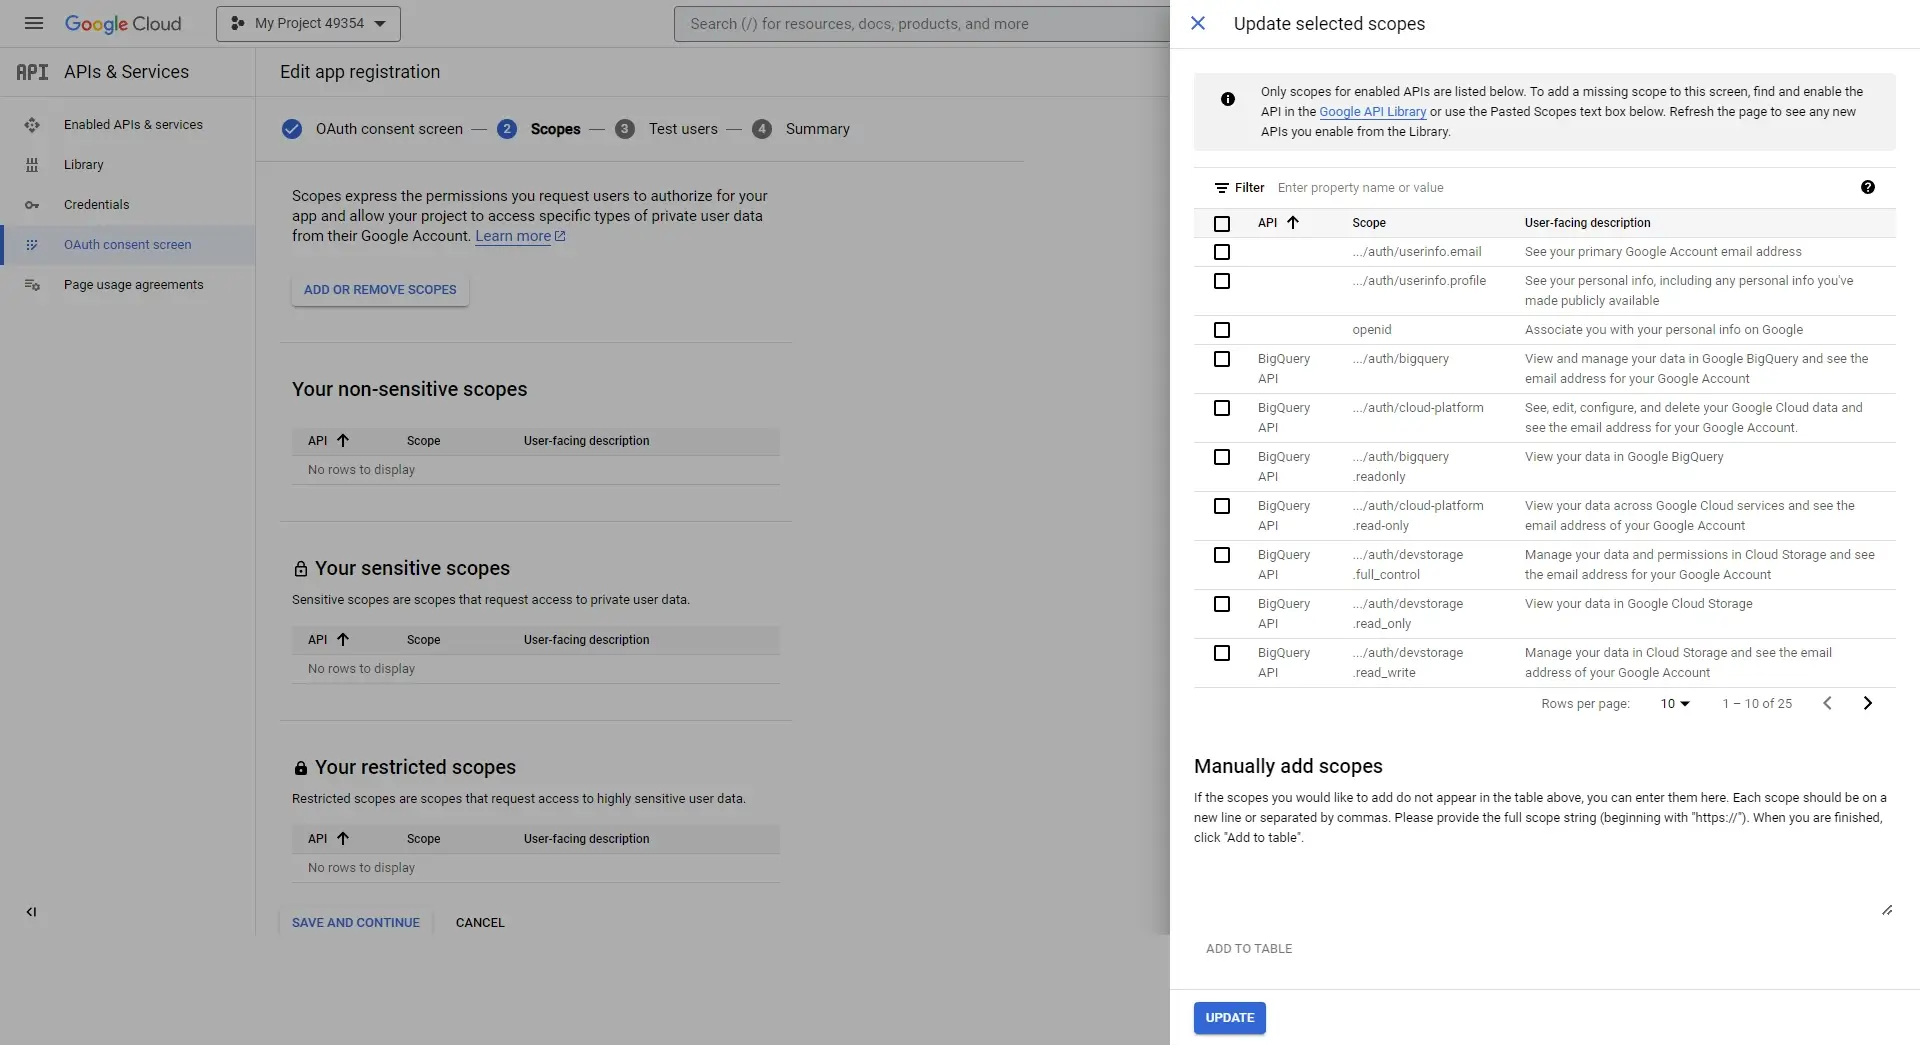  G Suite SSO with Joomla OIDC OAuth, Google Apps SSO for Joomla, create oauth client id